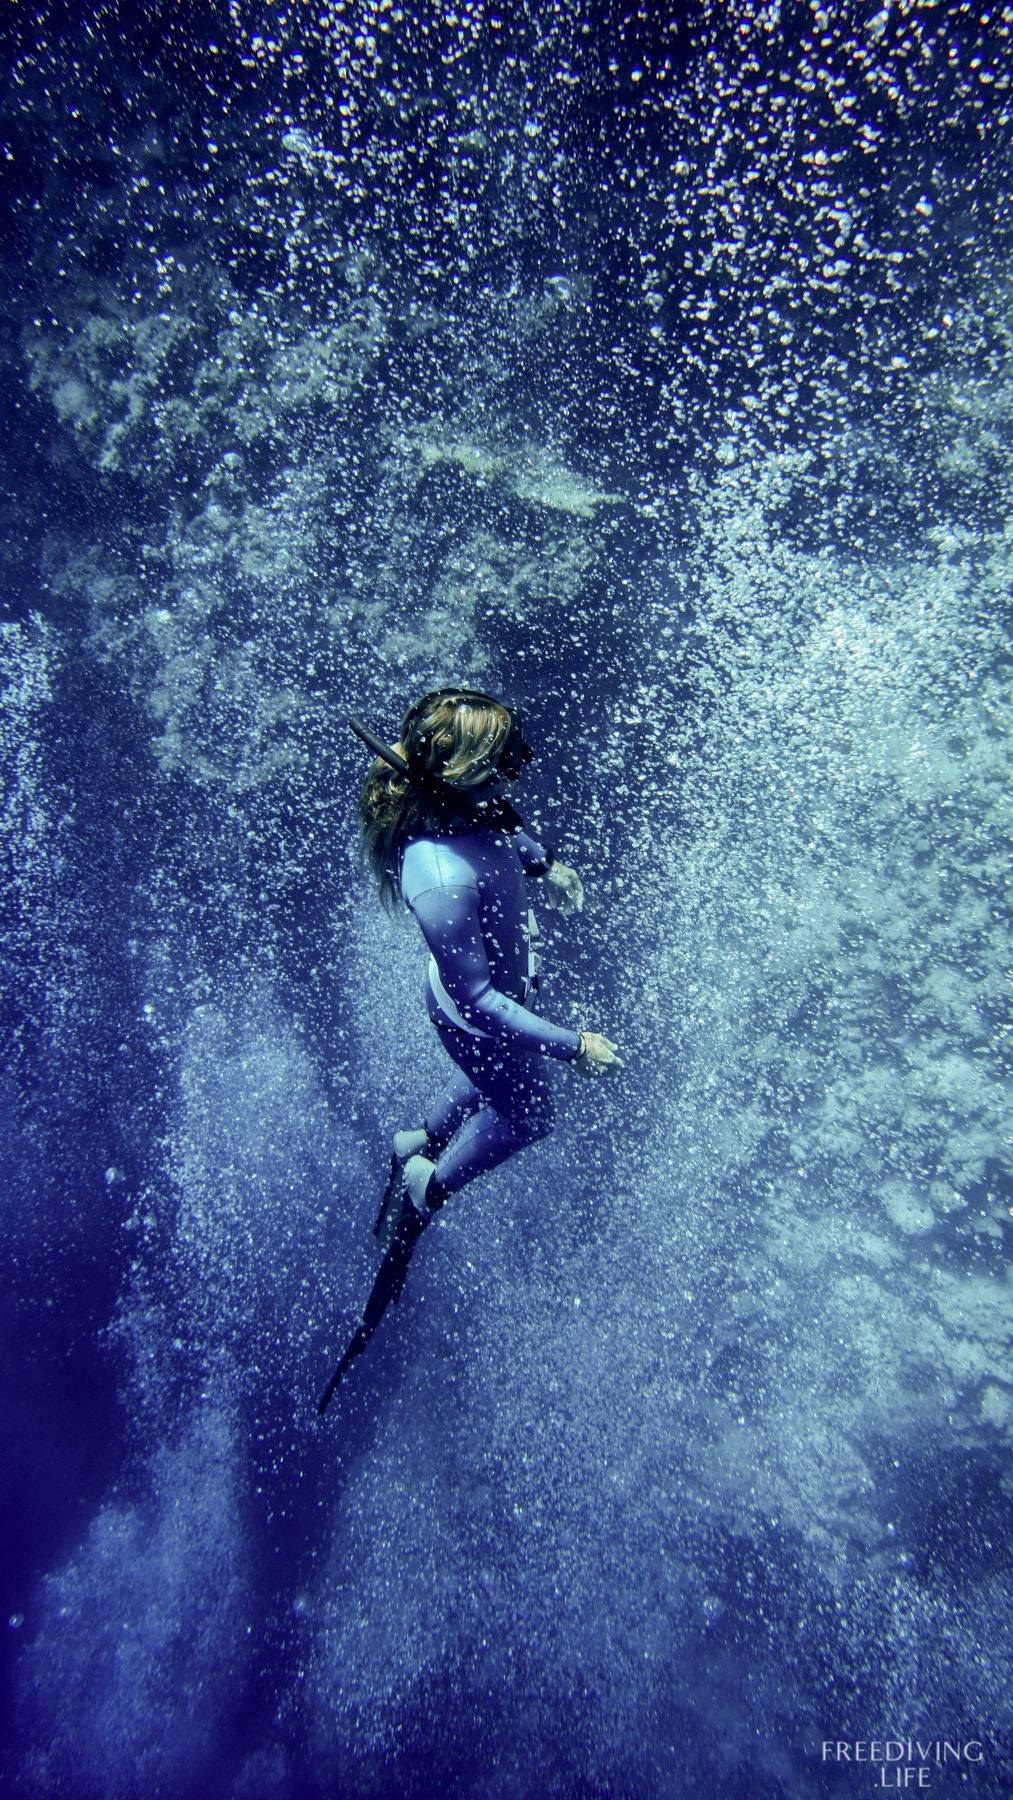 Freediving as a form of self development